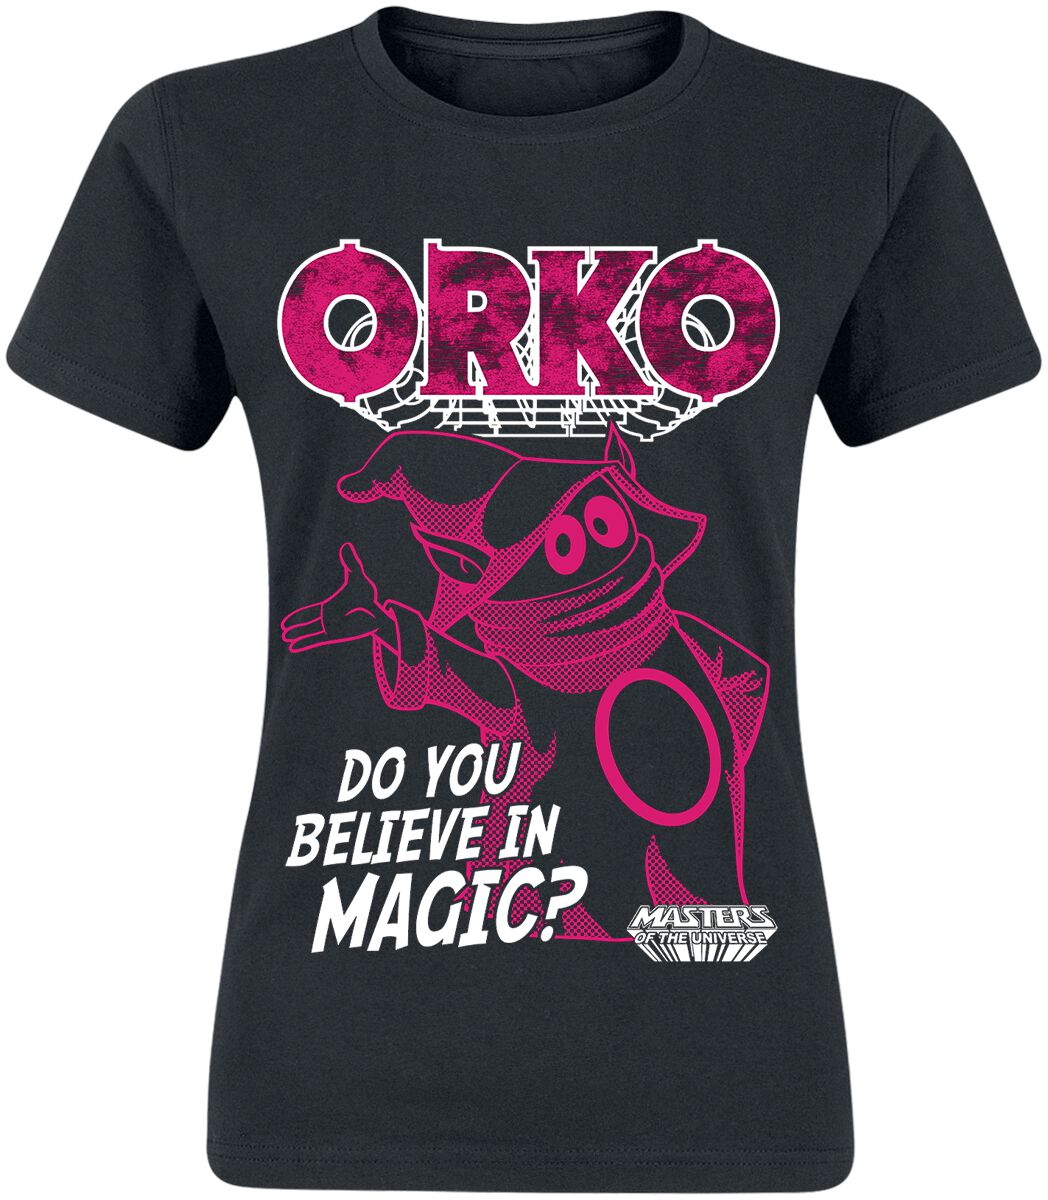 Masters Of The Universe Orko - Do You Believe In Magic T-Shirt black